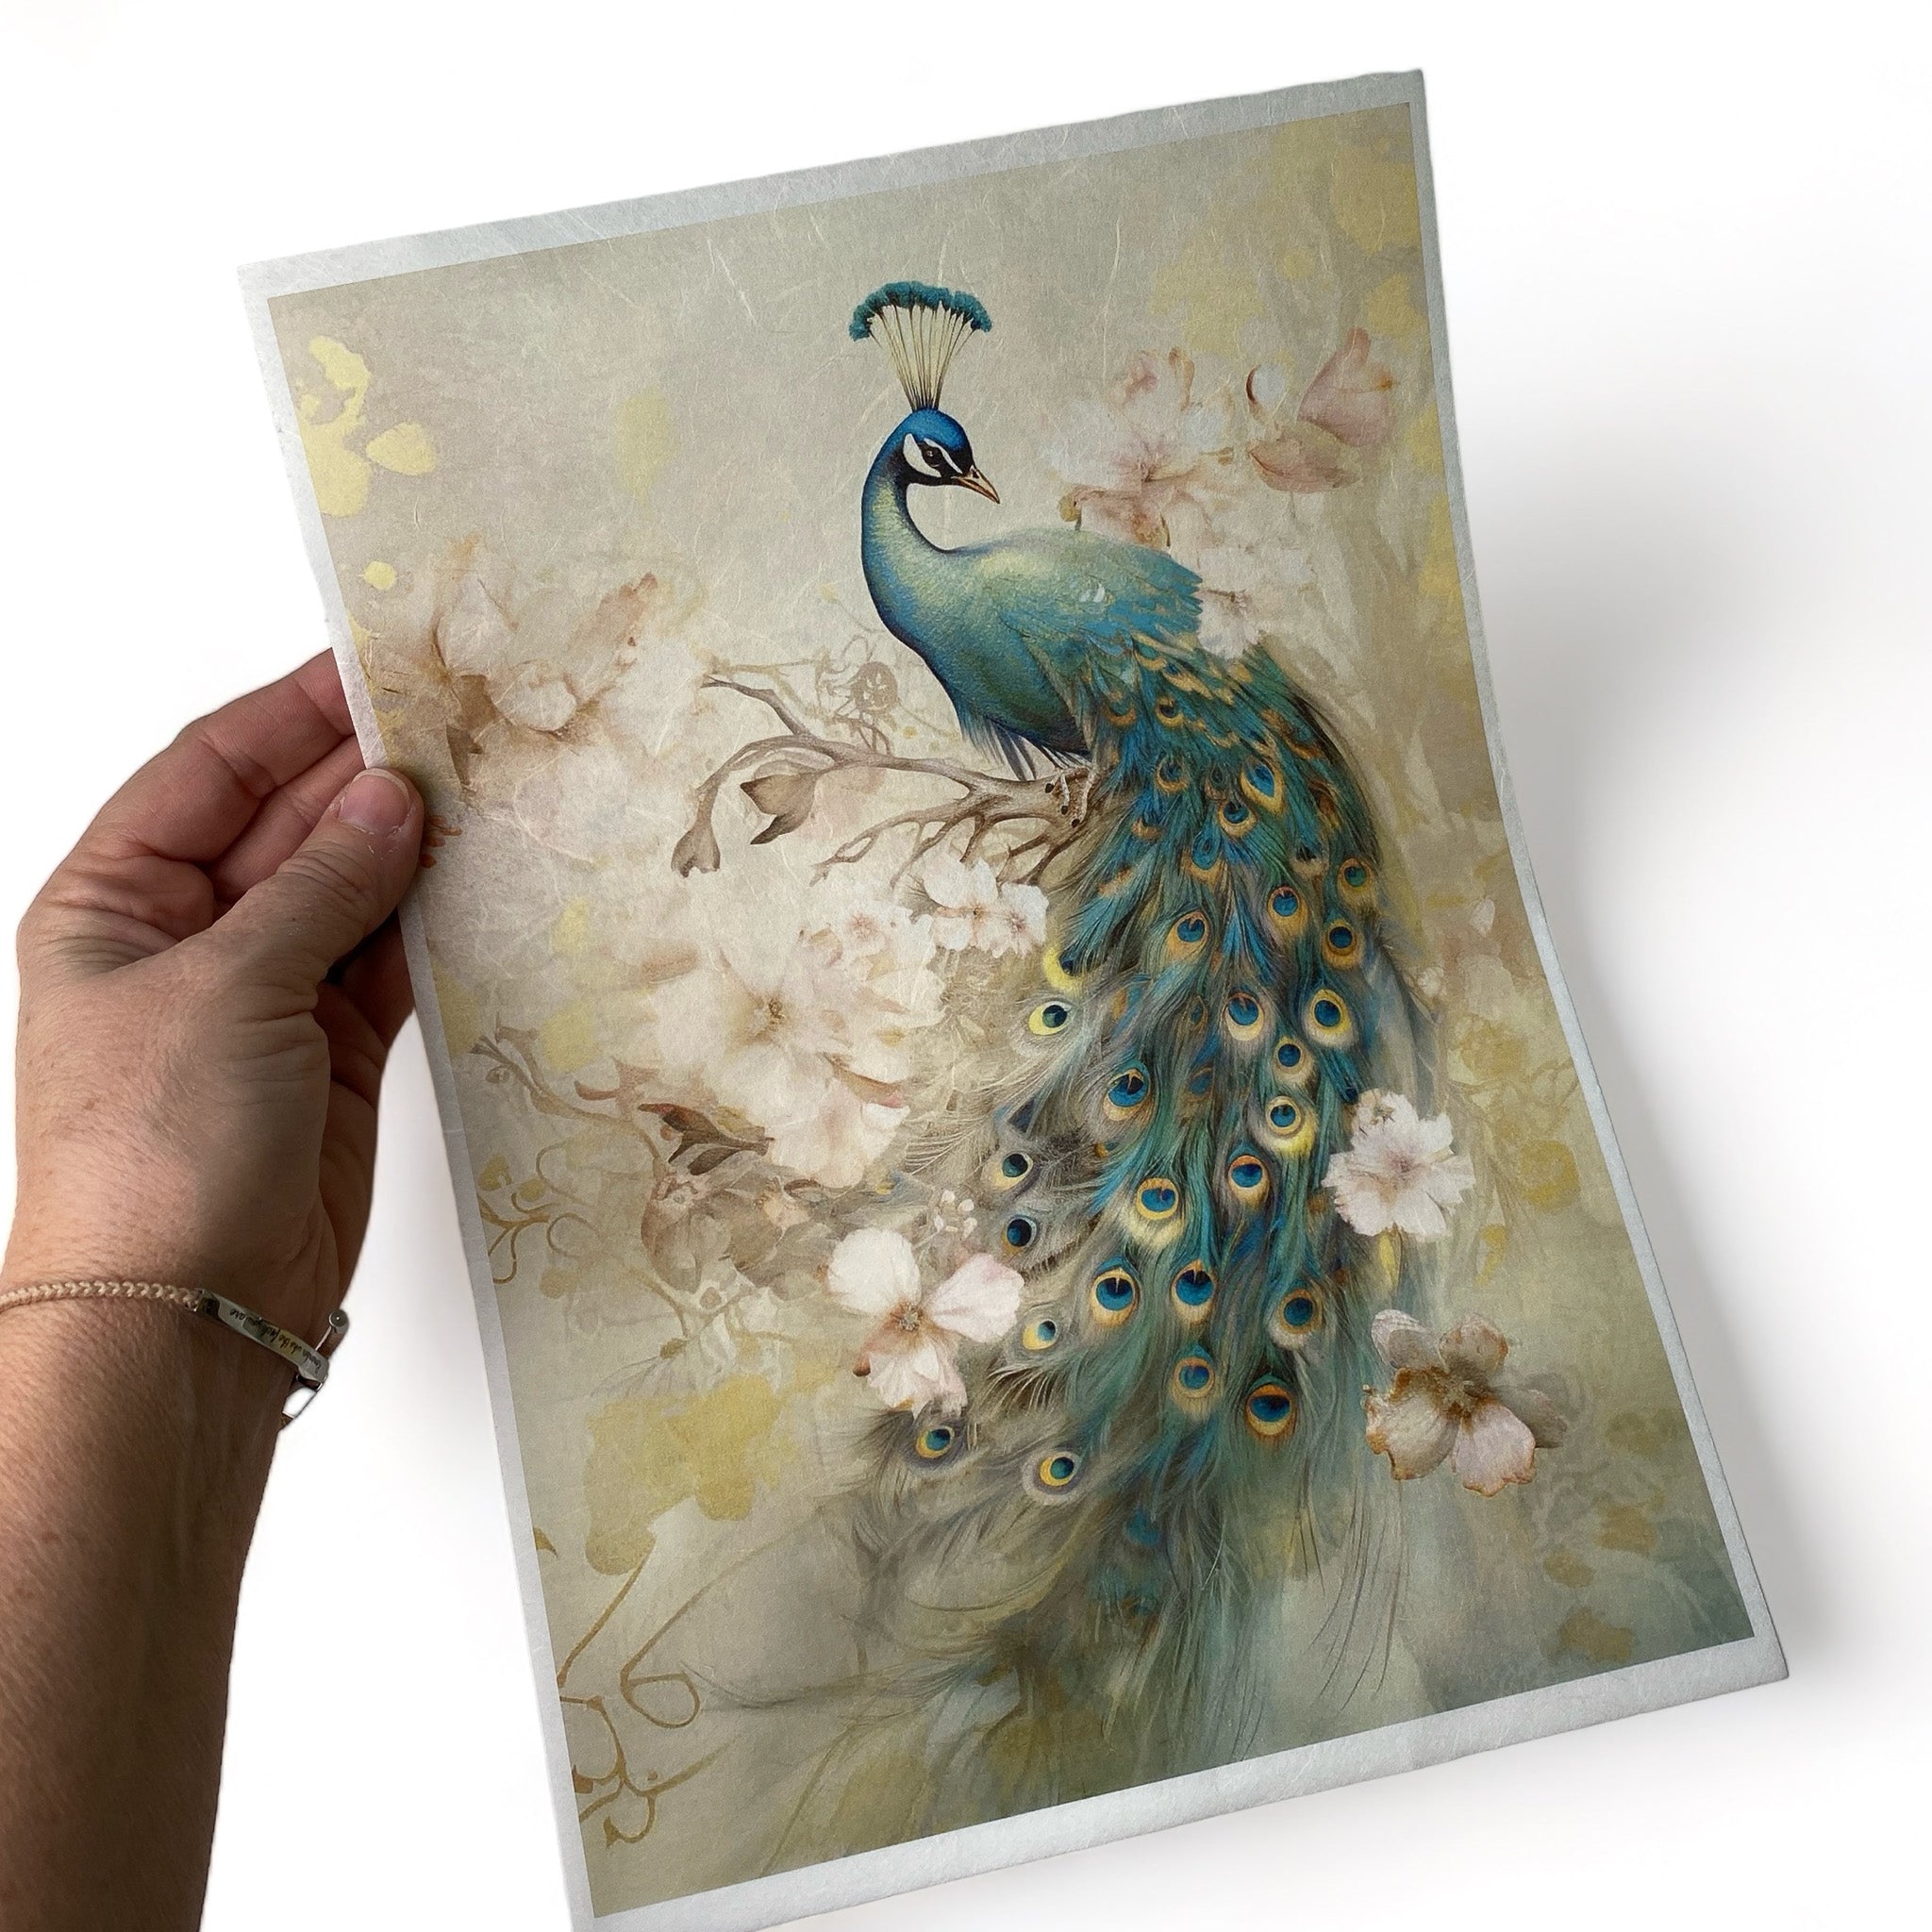 A hand holding and lifting Decoupage Queen's Dreamscape Peacock A4 Plus rice sheet is against a white background.